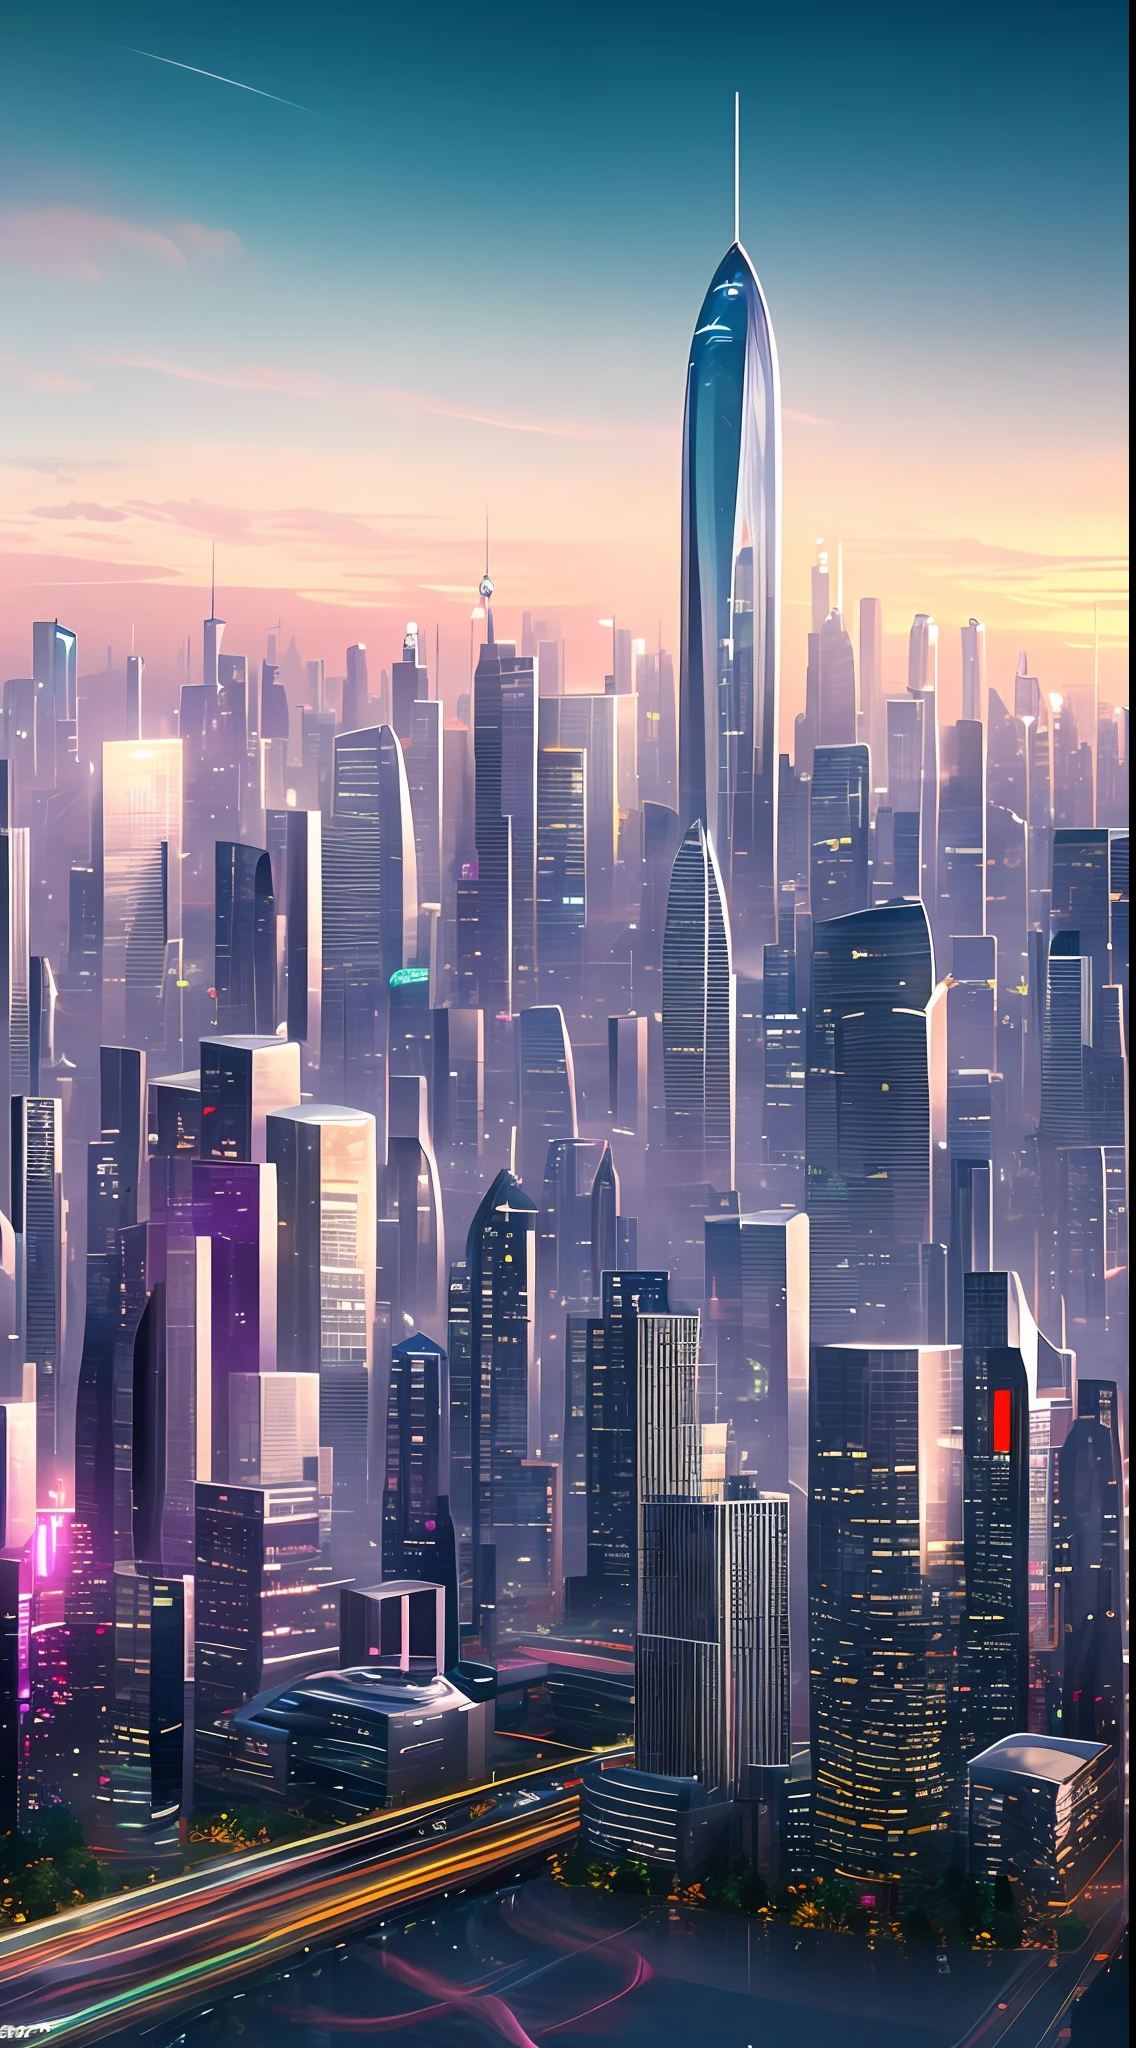 Style: Concept art. The scene: Futuristic cityscapes with towering skyscrapers and sleek aerodynamic vehicles speeding through the air. High-resolution OLED GUI interfaces in the building&#39;s windows are filled with transparent data visualization infographics showing everything from weather patterns to traffic flow. Colors are saturated and vibrant, with warm pinks and purples dominating the skyline. The overall effect is both beautiful and awe-inspiring.